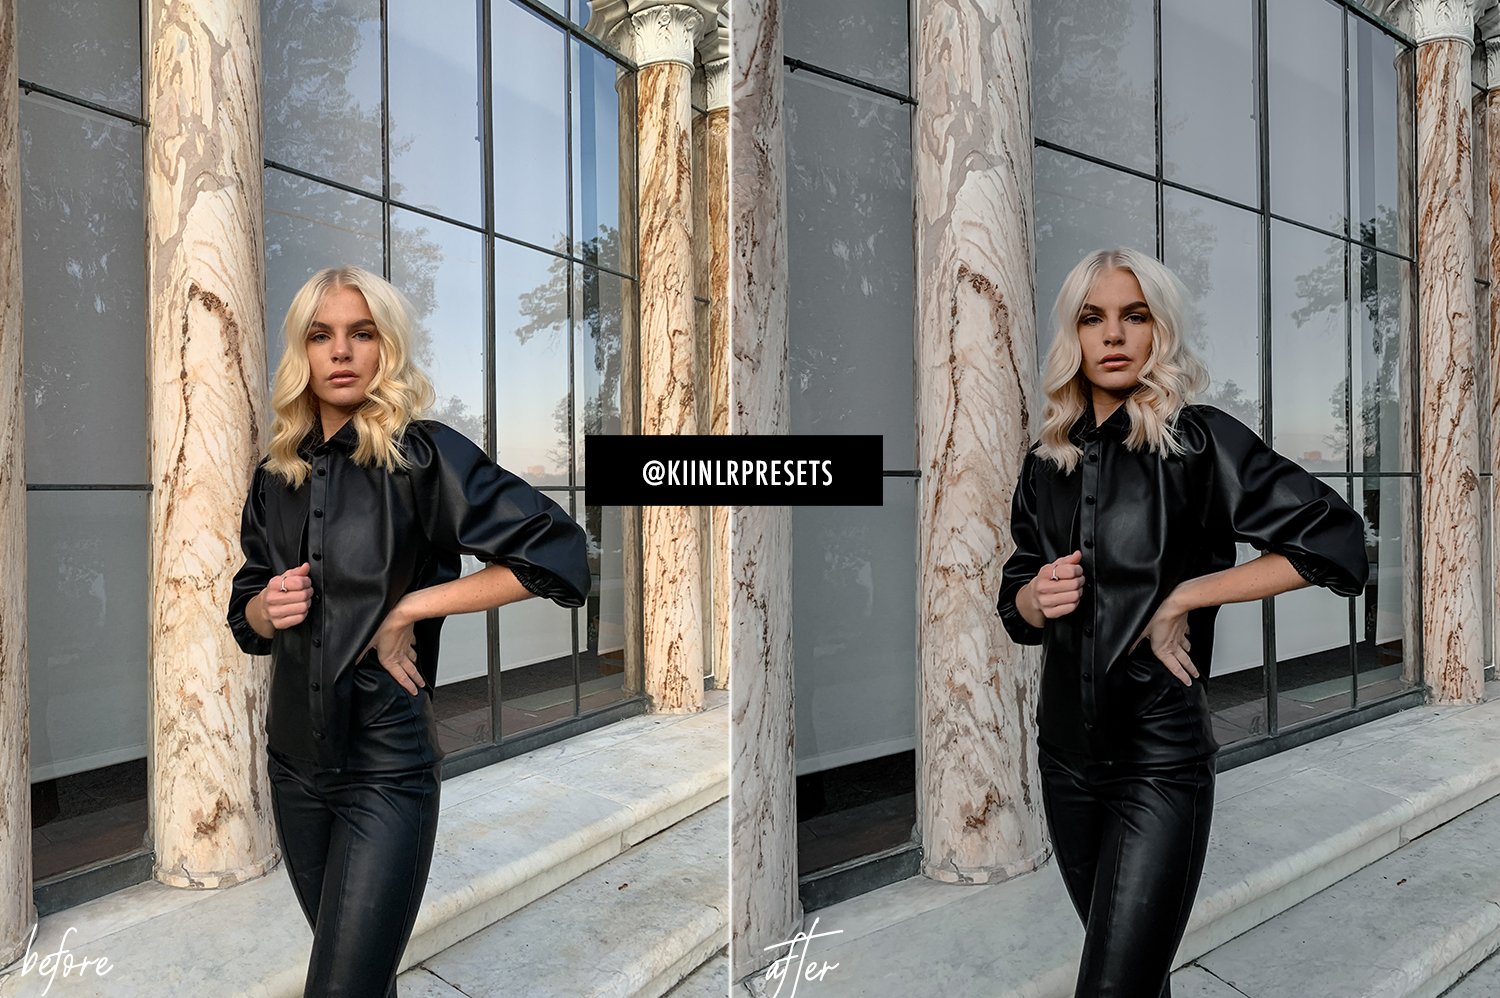 A woman in a black leather outfit posing in front of a building.